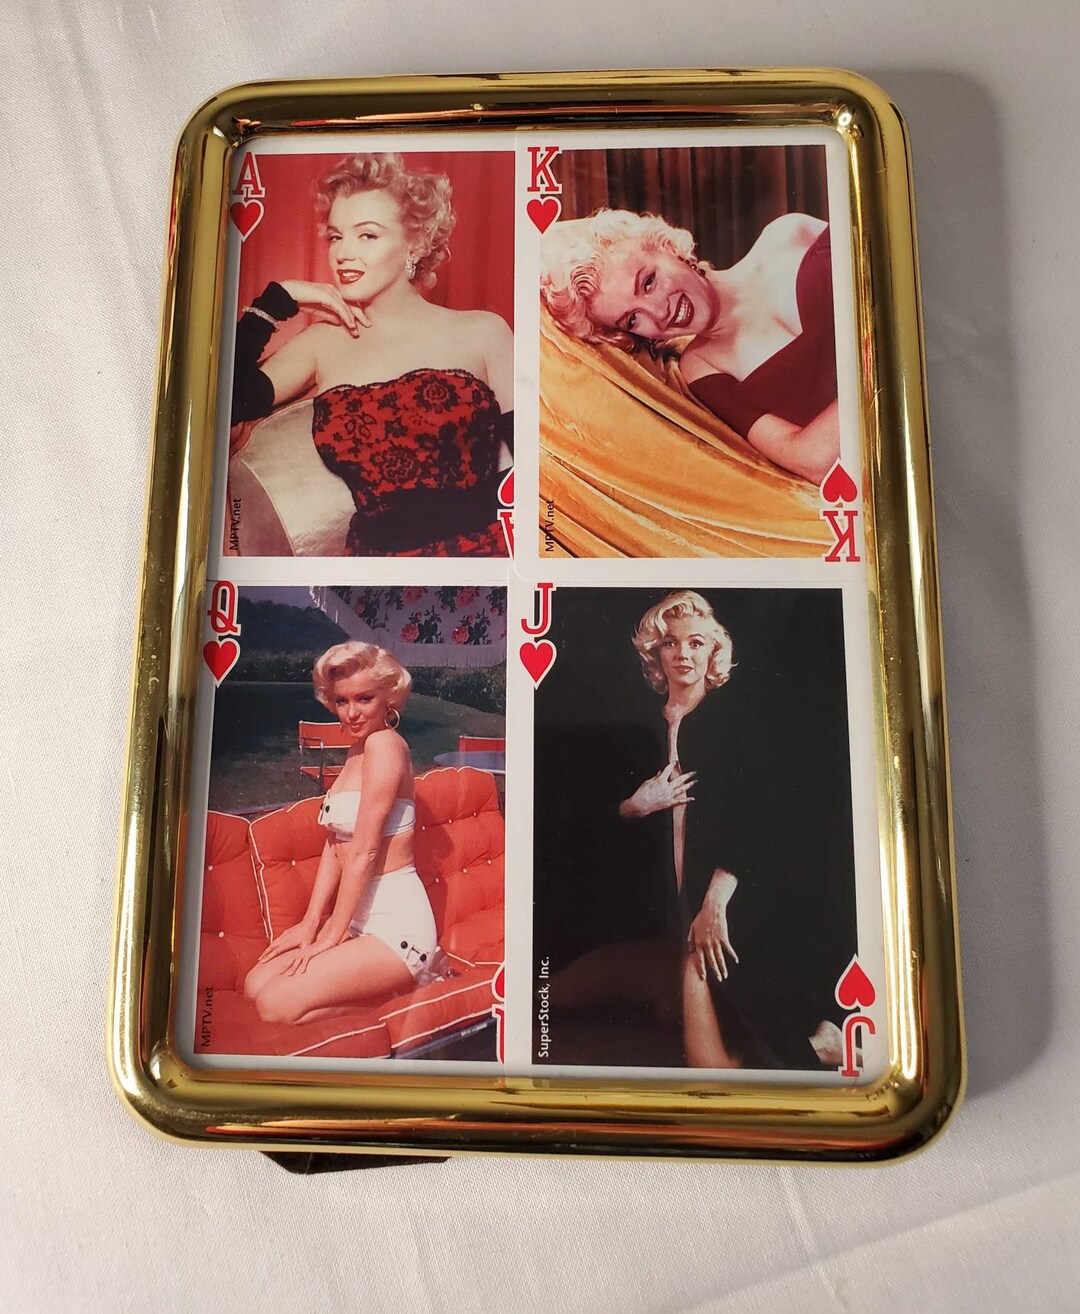 German playing cards, queen of hearts, jack, king - SuperStock